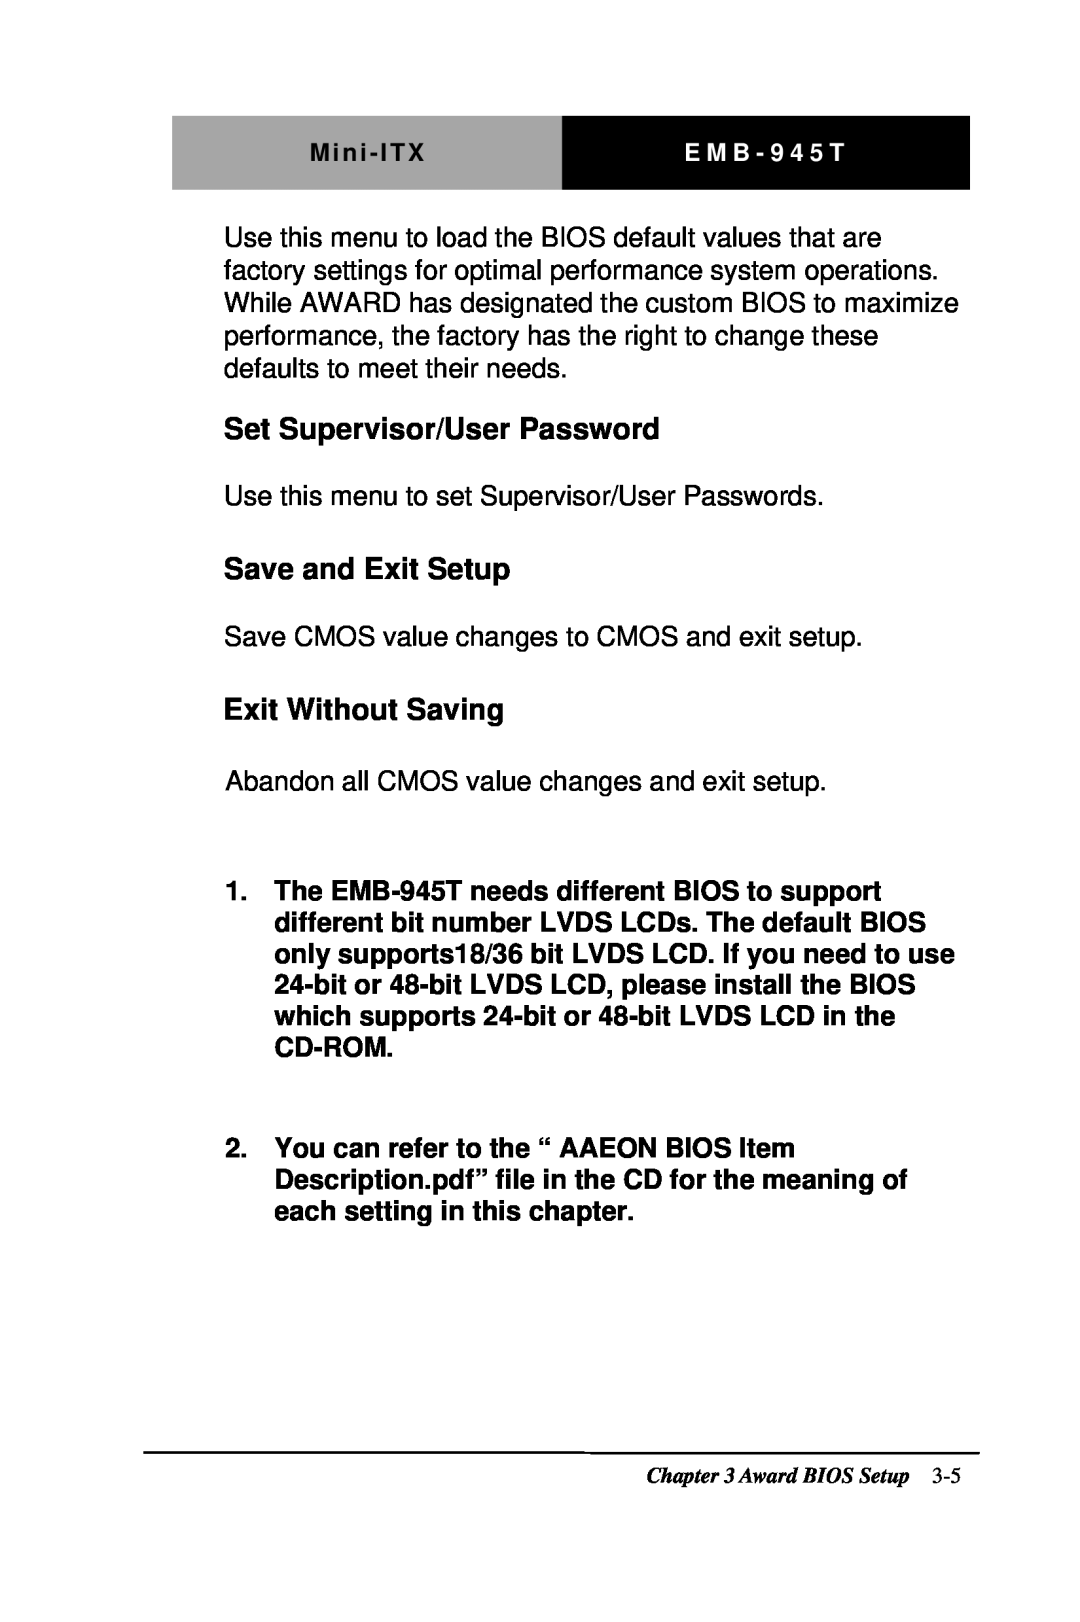 Intel EMB-945T manual Set Supervisor/User Password, Save and Exit Setup, Exit Without Saving 